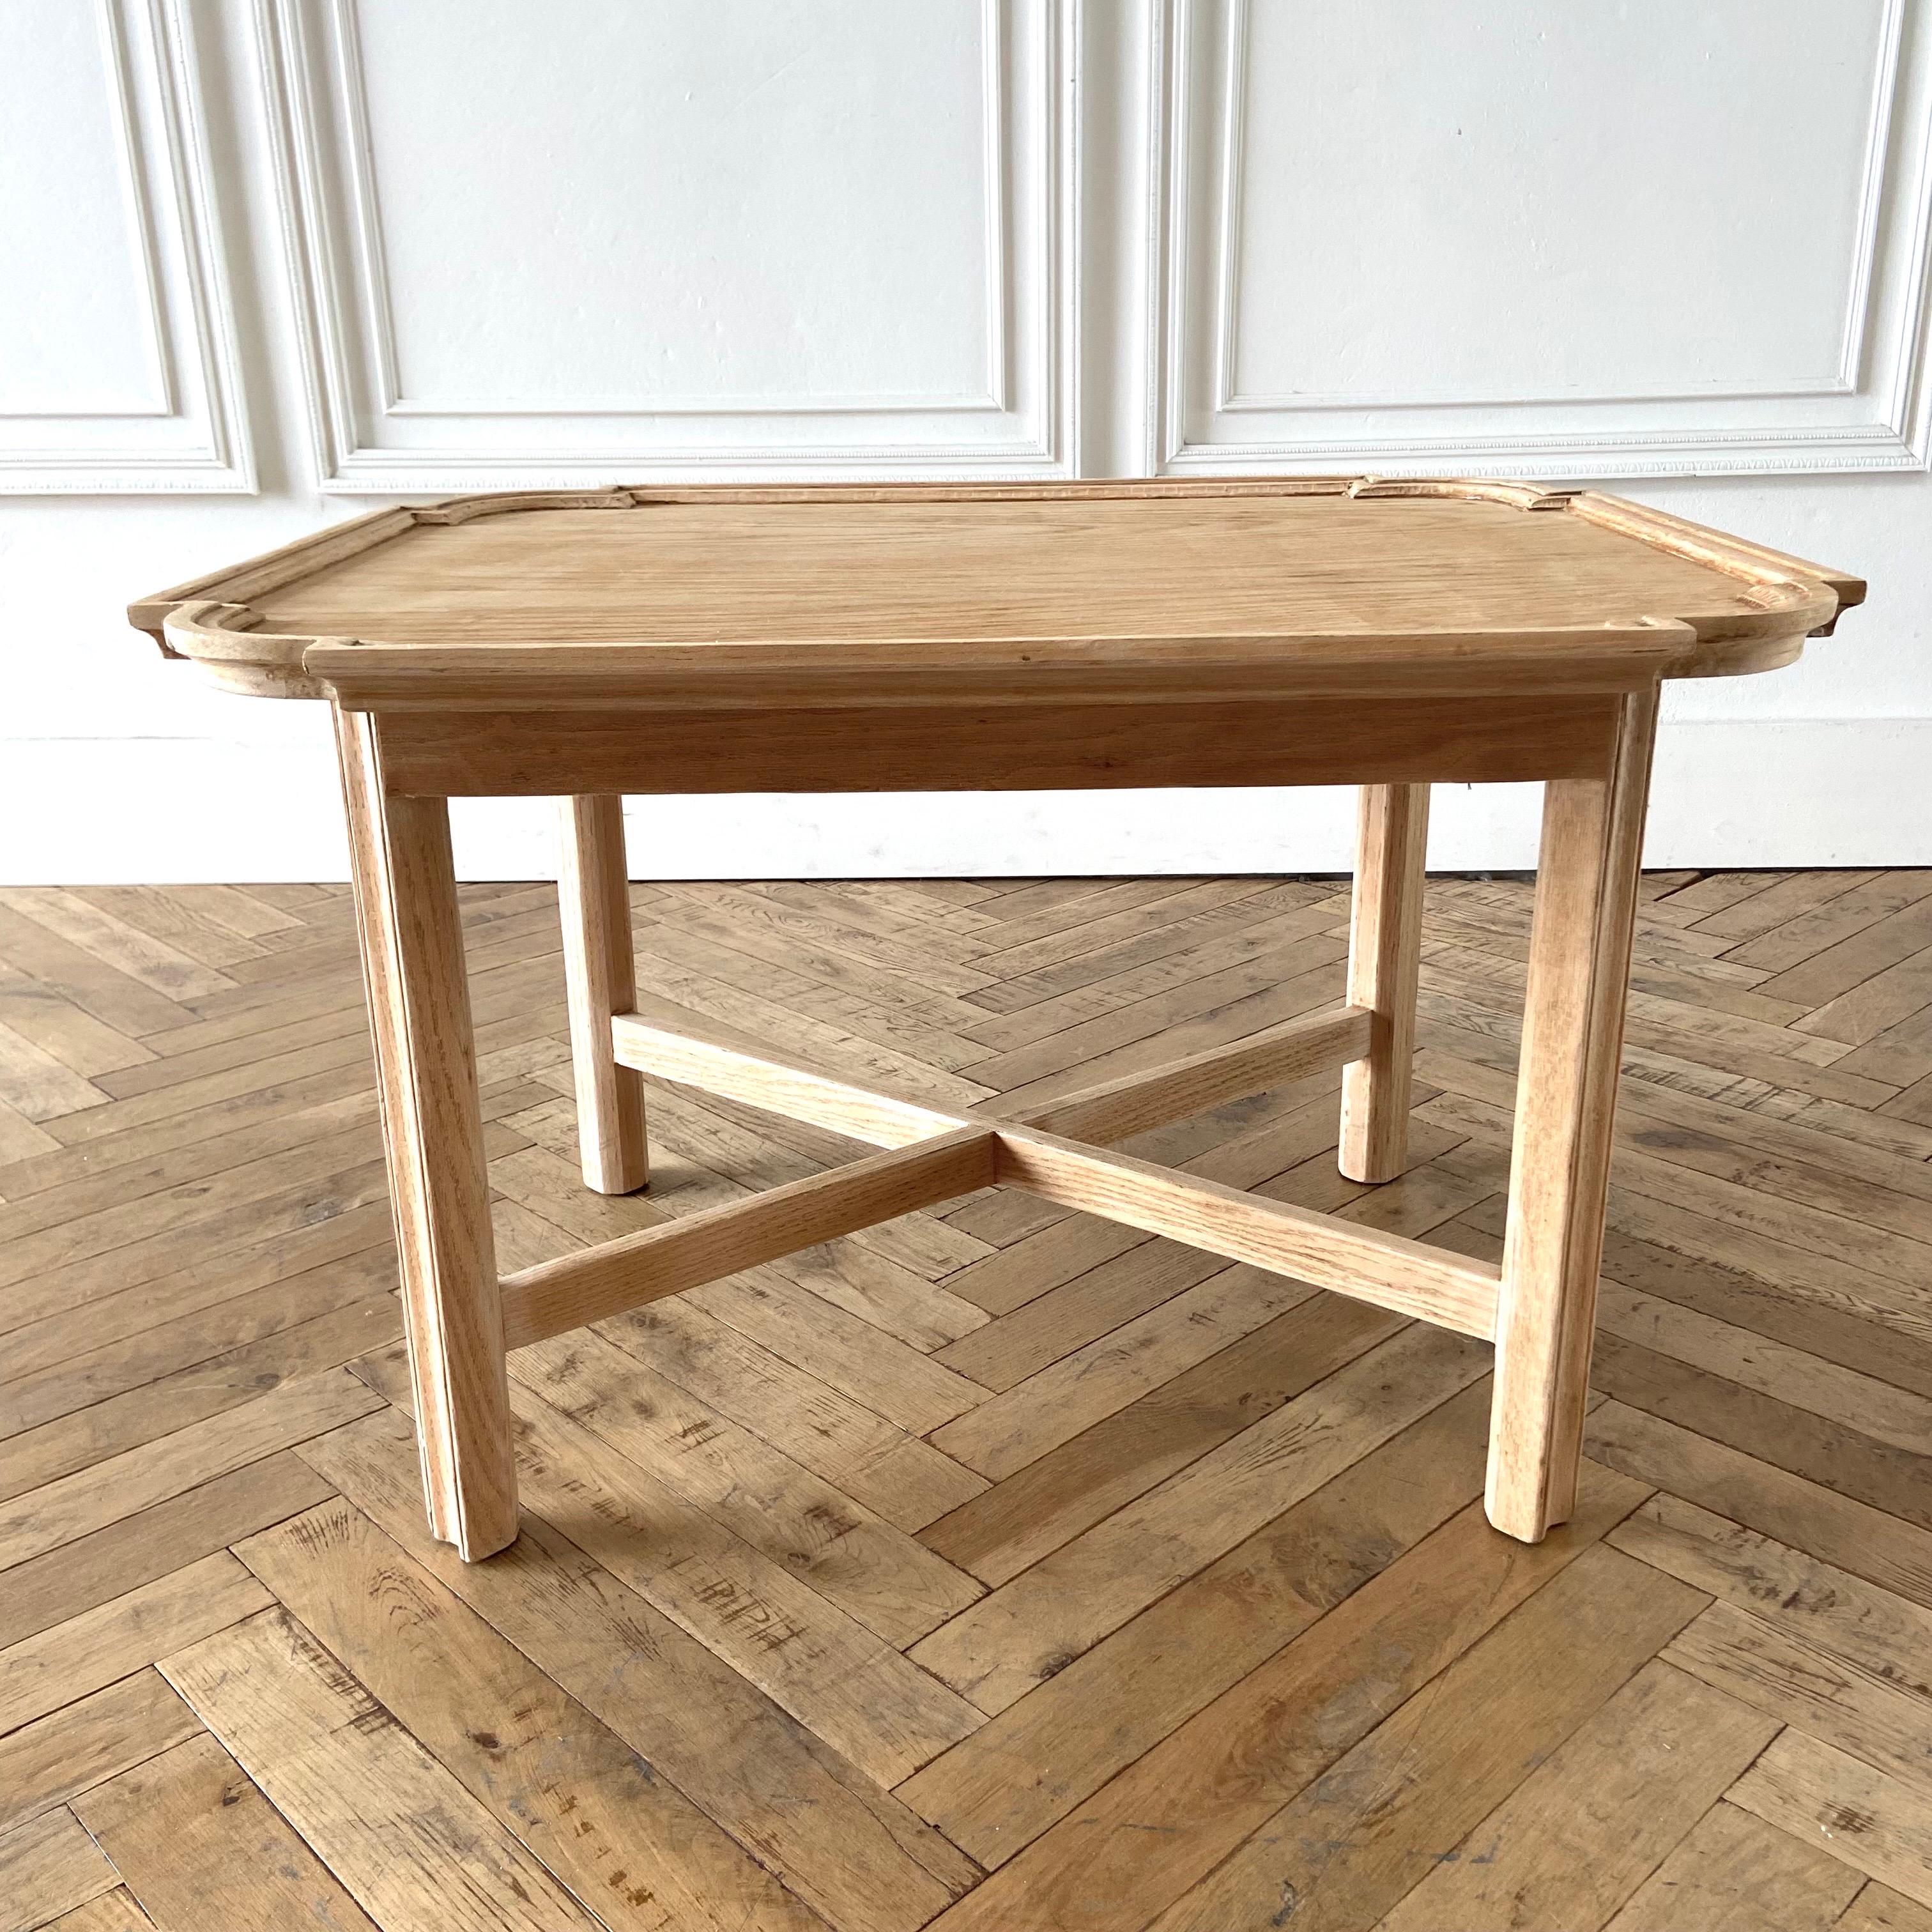 Vintage Oak side table in natural raw sand blasted, bleached finish.
Solid sturdy, ready for everyday use as a side table or use both as a coffee table. 
 Please see other listing for mate.
Oak side table 36”w x 30”d x 23”h.